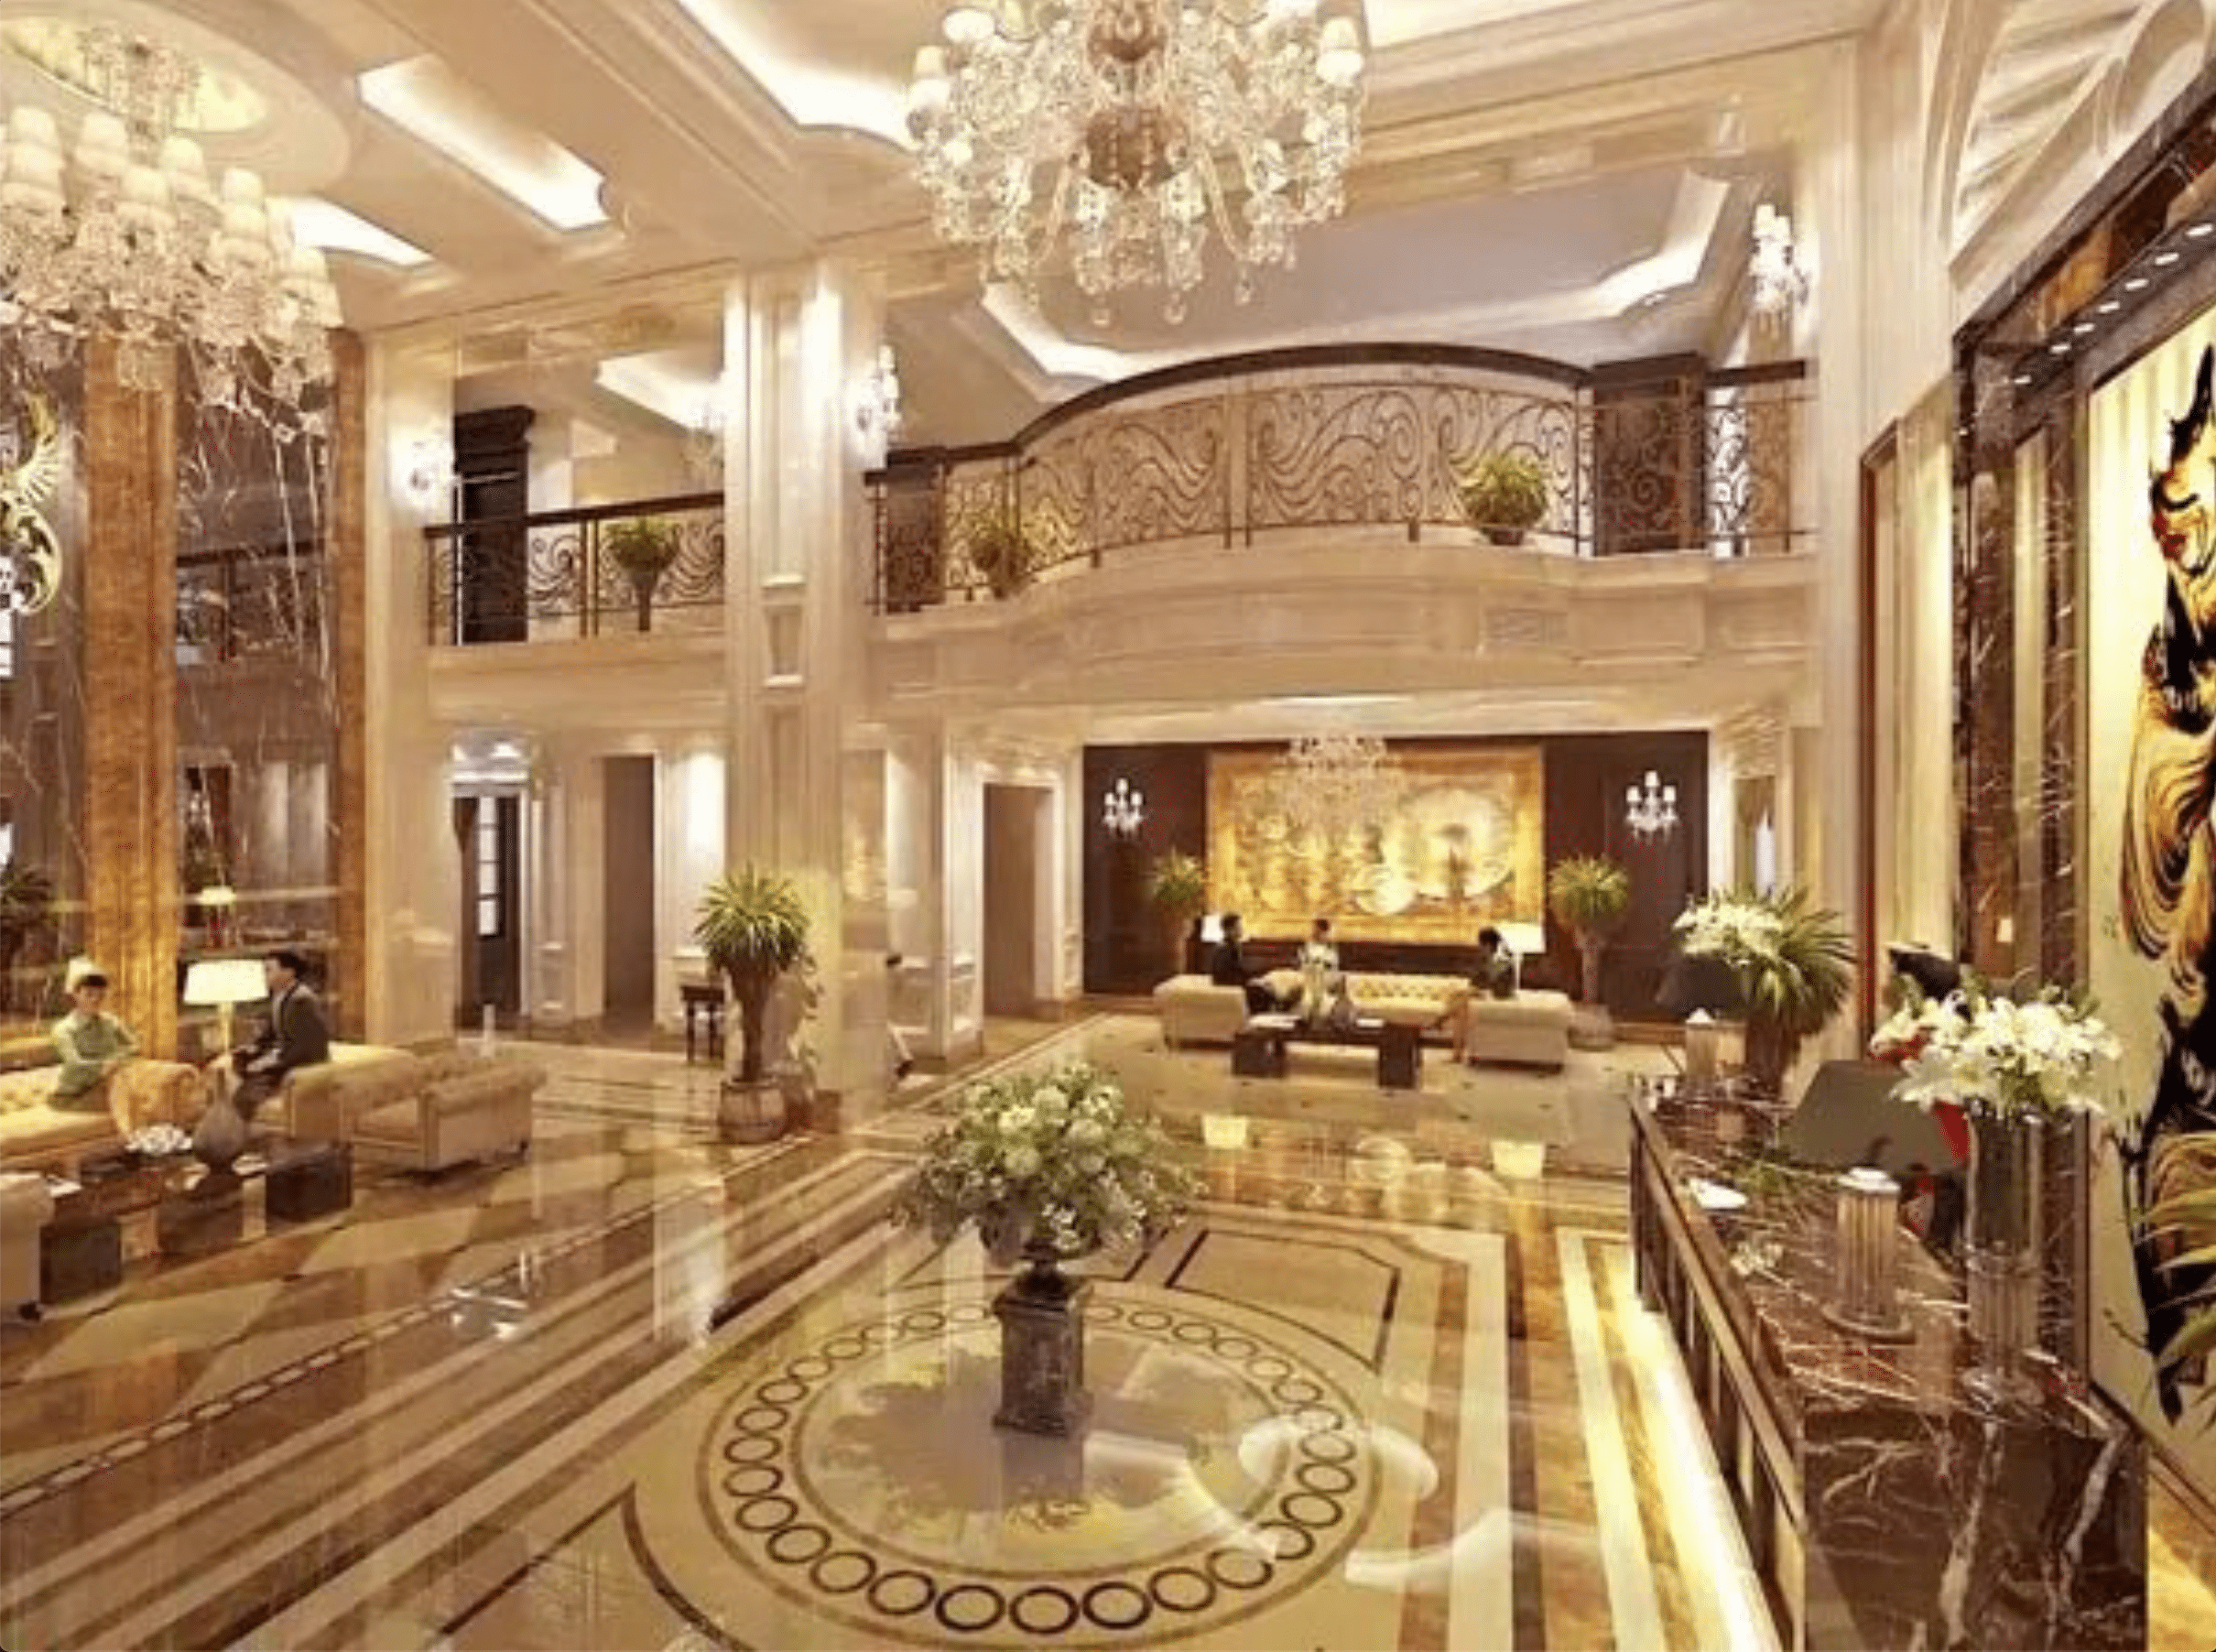 Step Inside the World's Most Expensive House - Antilia